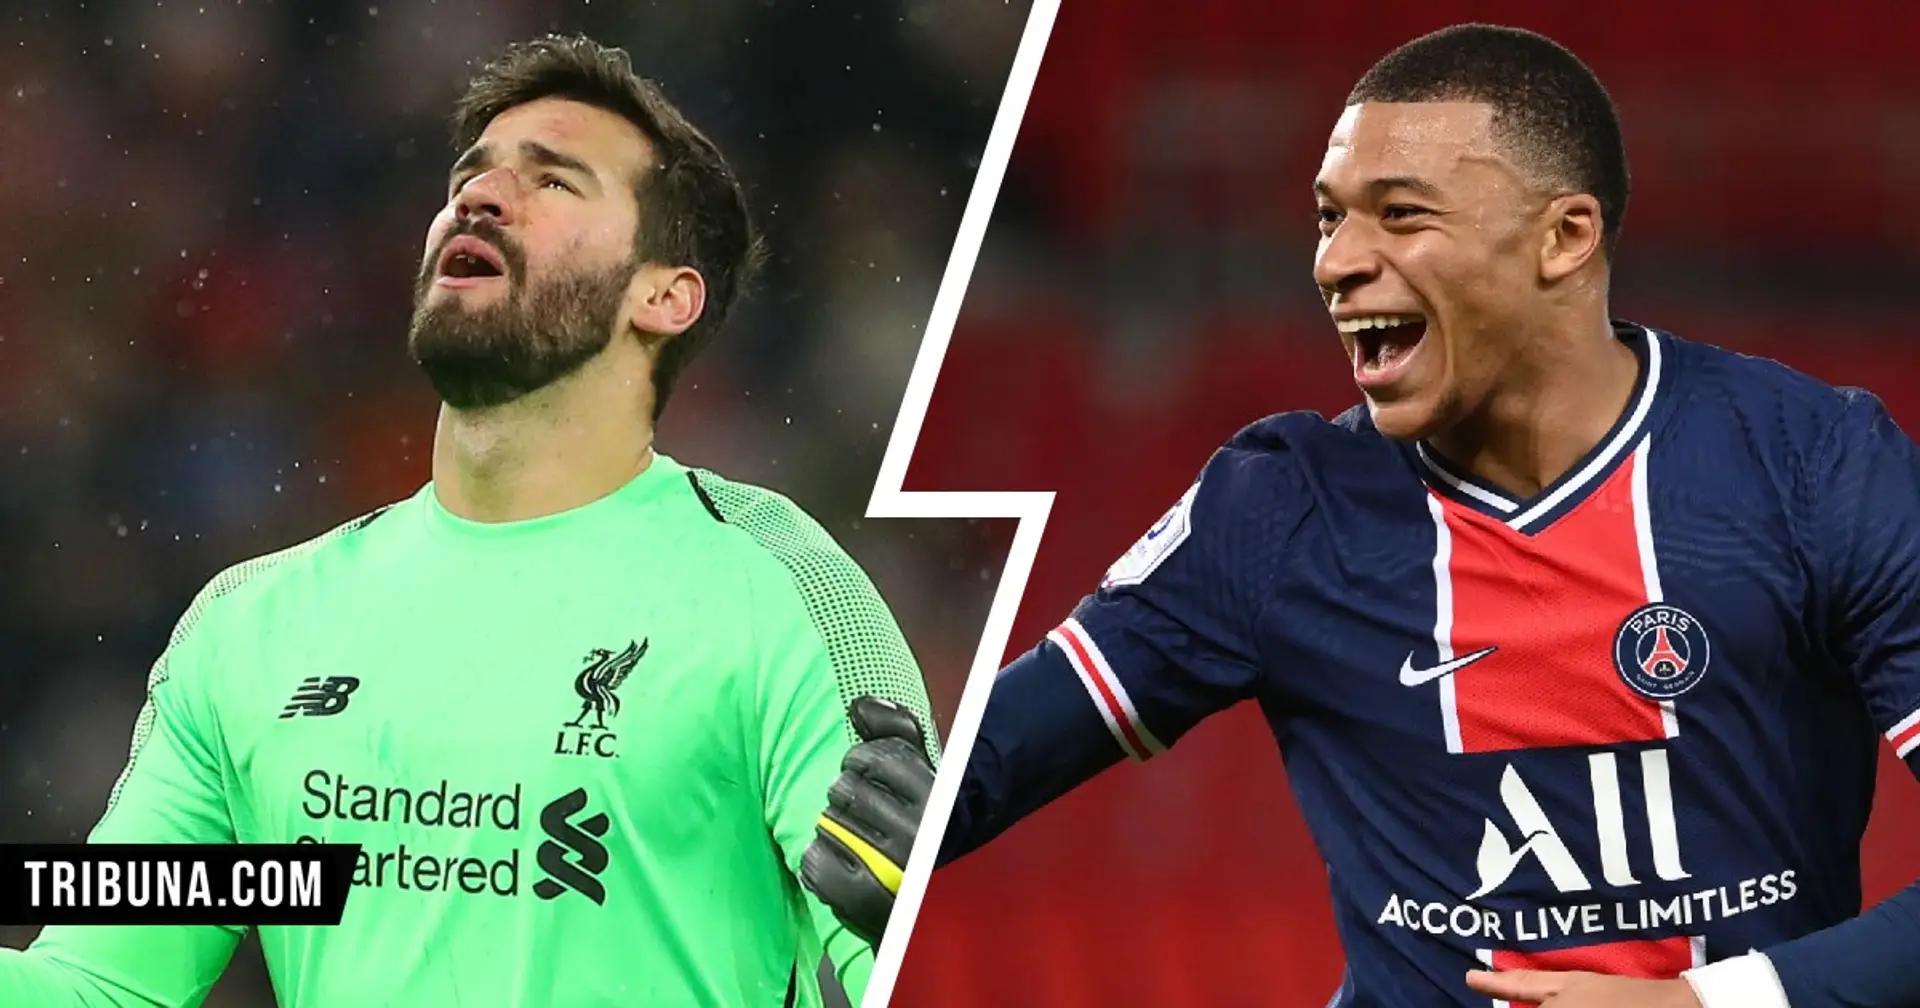 PSG likely to demand €200m for Mbappe and 4 more stories at Liverpool you might've missed